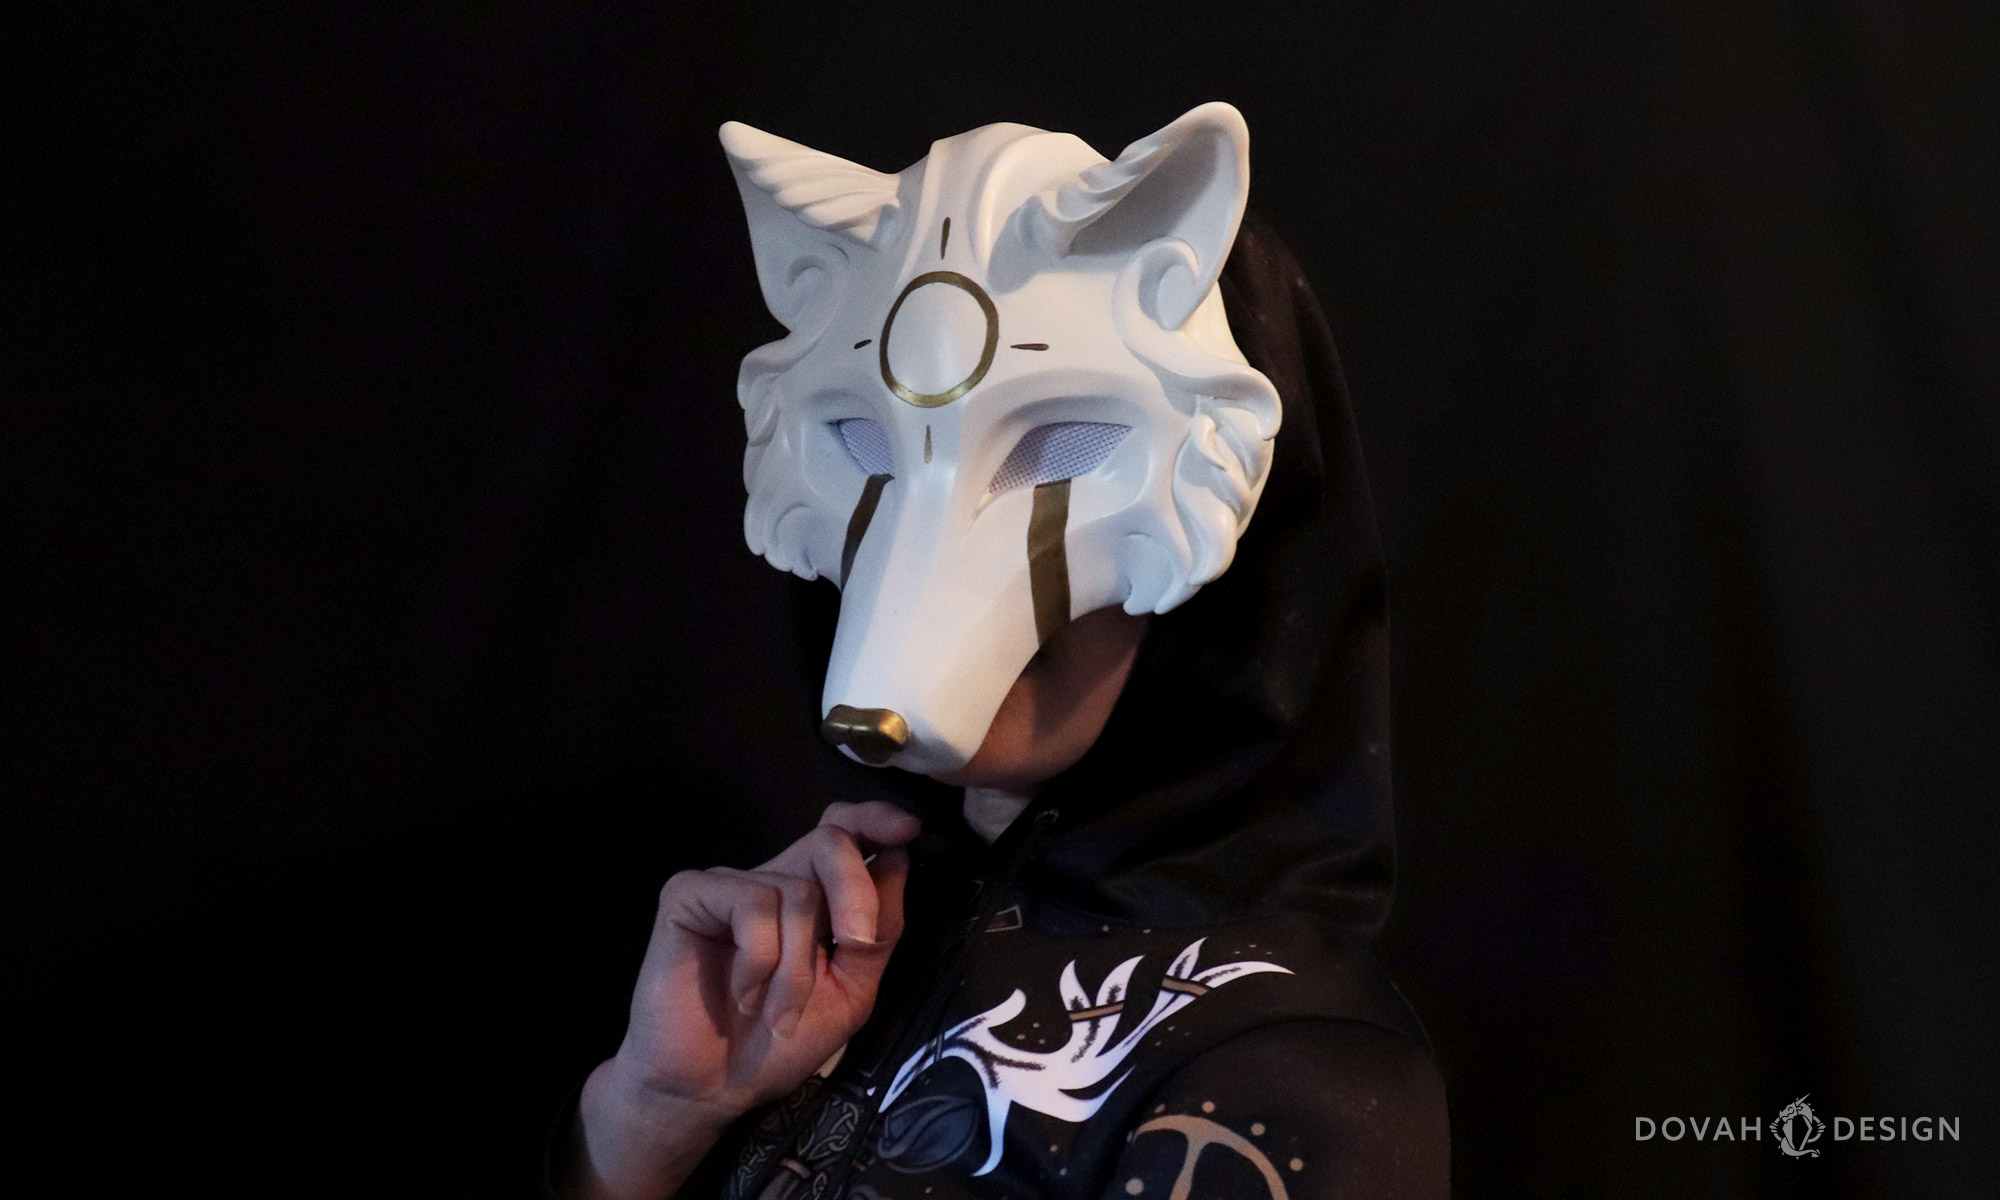 White "Skoll" wolf mask worn by a woman in a black hoodie, posed facing to the left in front of a black background.